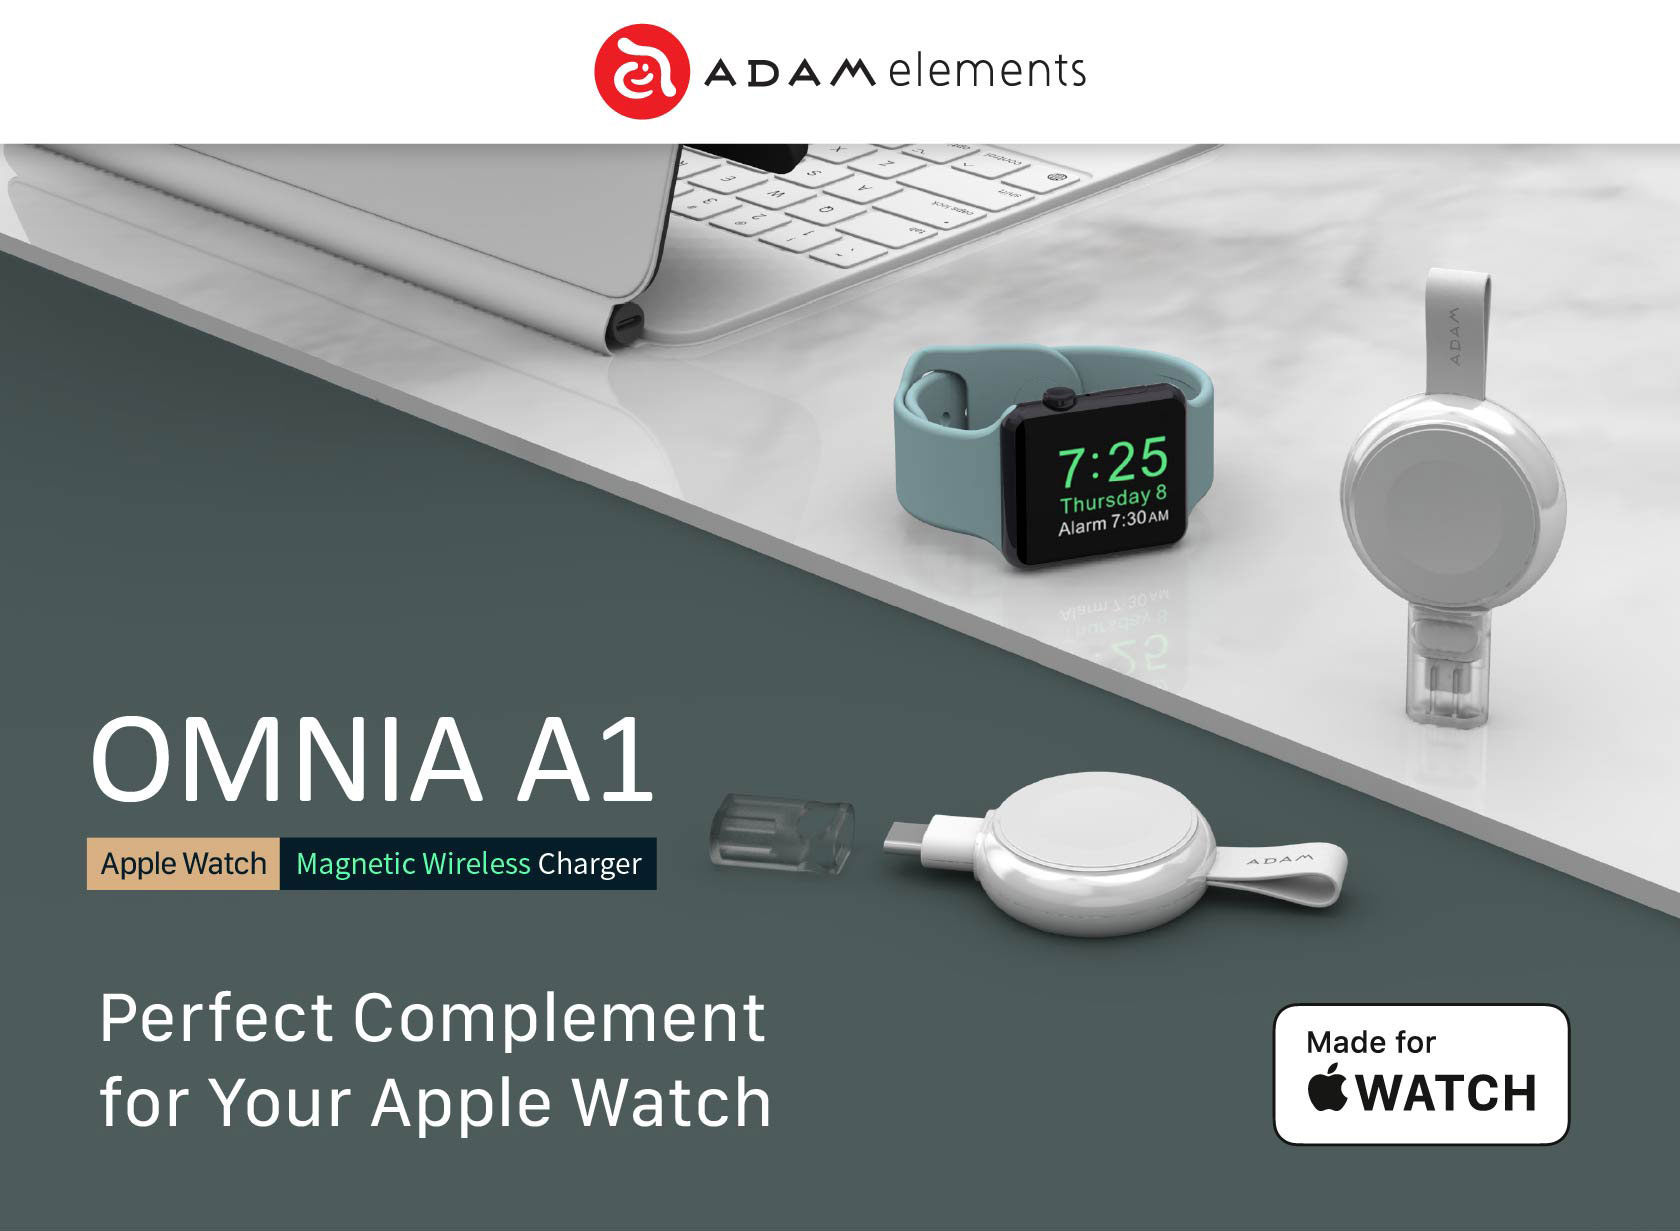 OMNIA A1 Apple Watch Magnetic Wireless Charger 1